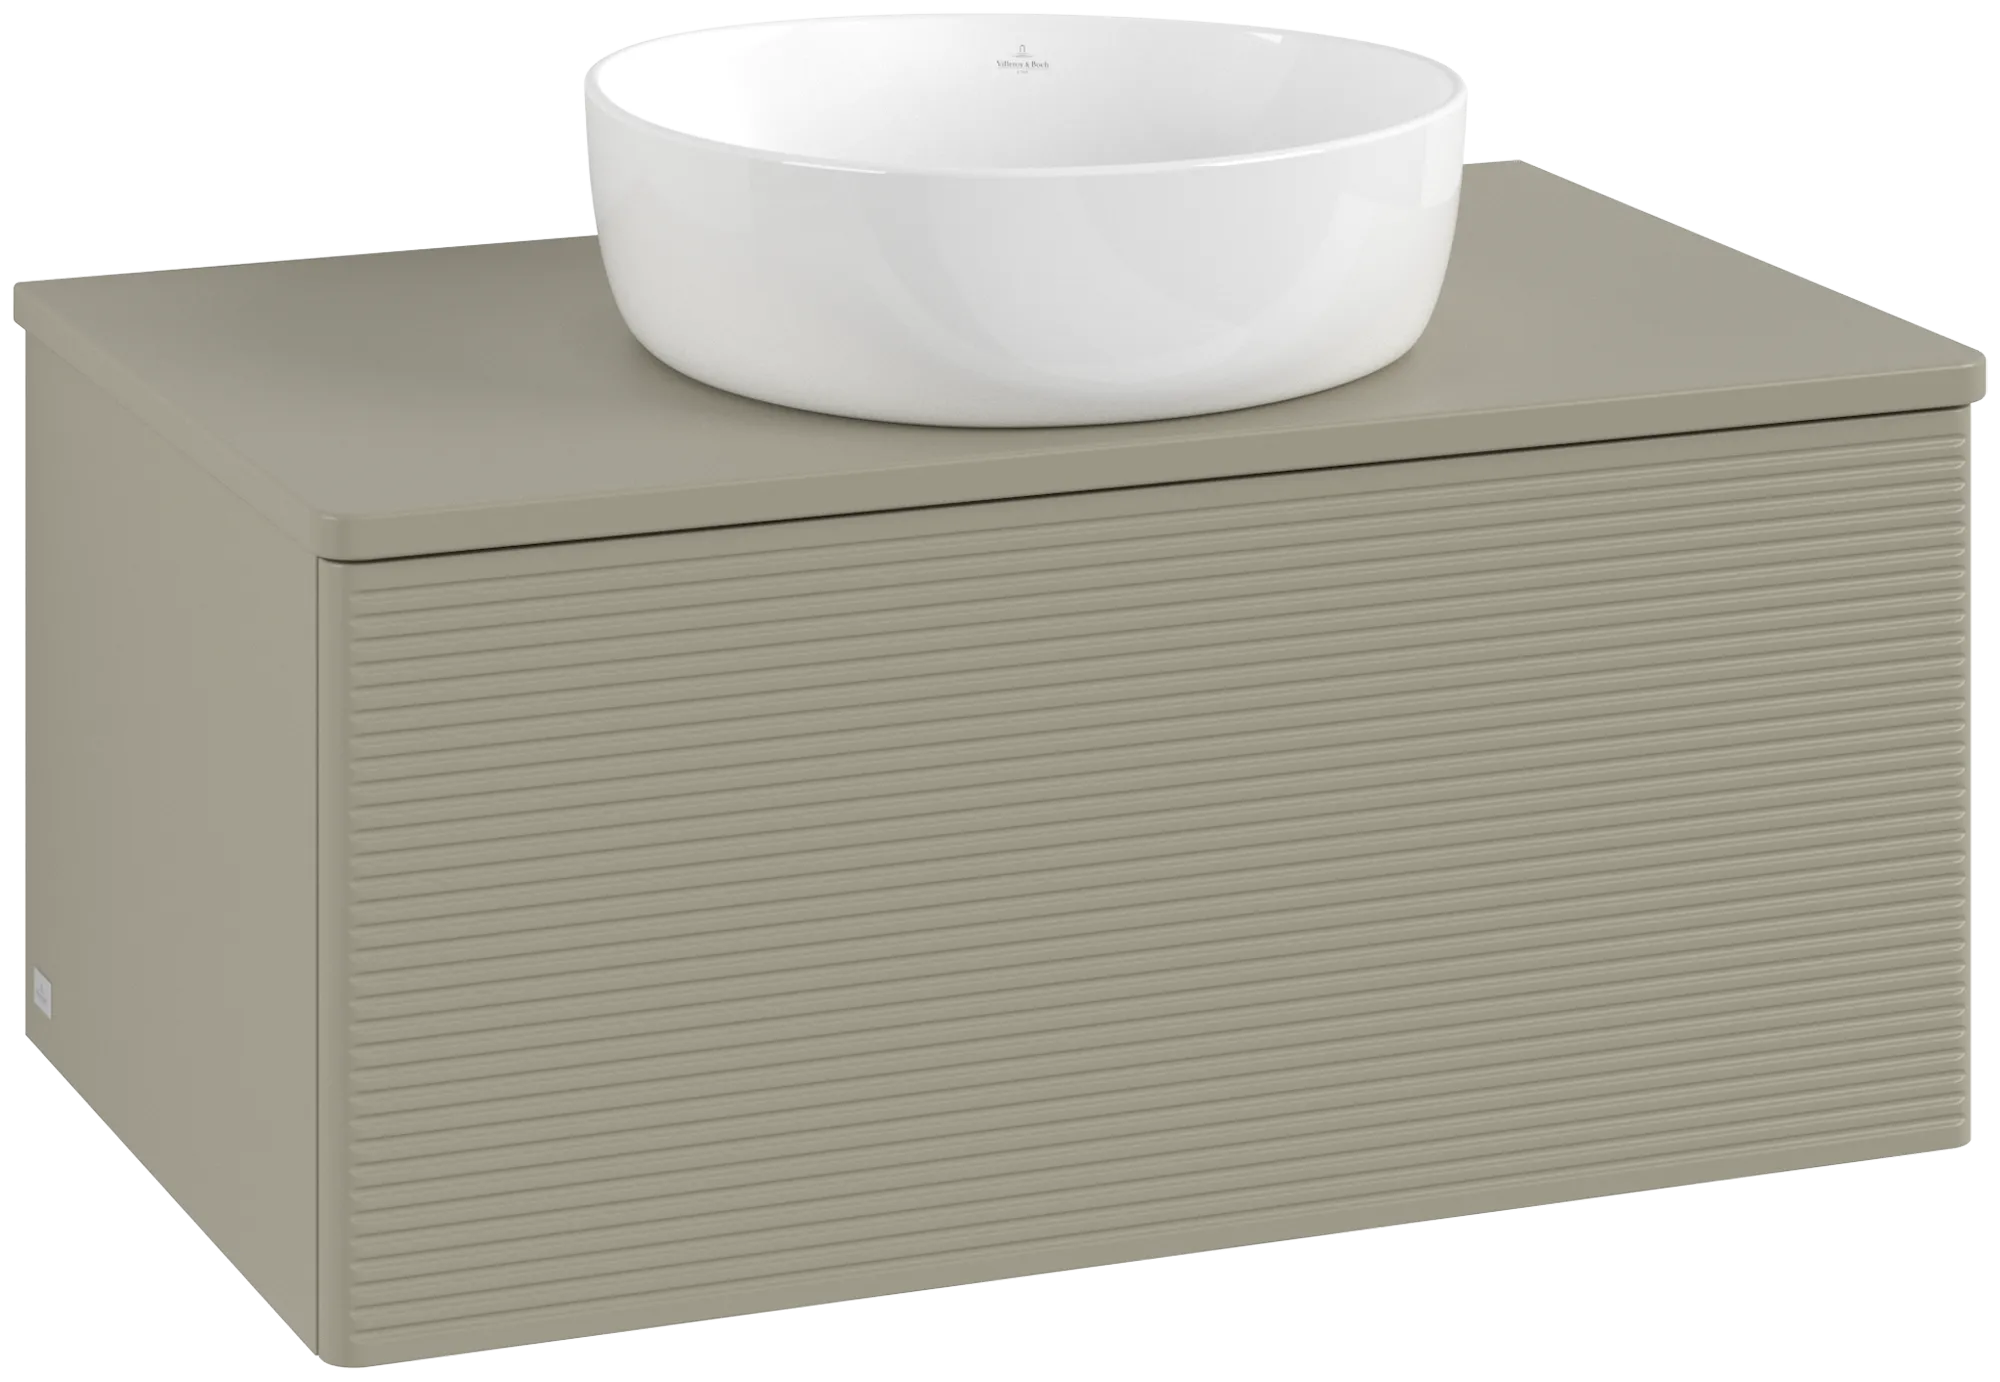 Obrázek VILLEROY BOCH Antao Vanity unit, with lighting, 1 pull-out compartment, 800 x 360 x 500 mm, Front with grain texture, Stone Grey Matt Lacquer / Stone Grey Matt Lacquer #L30150HK